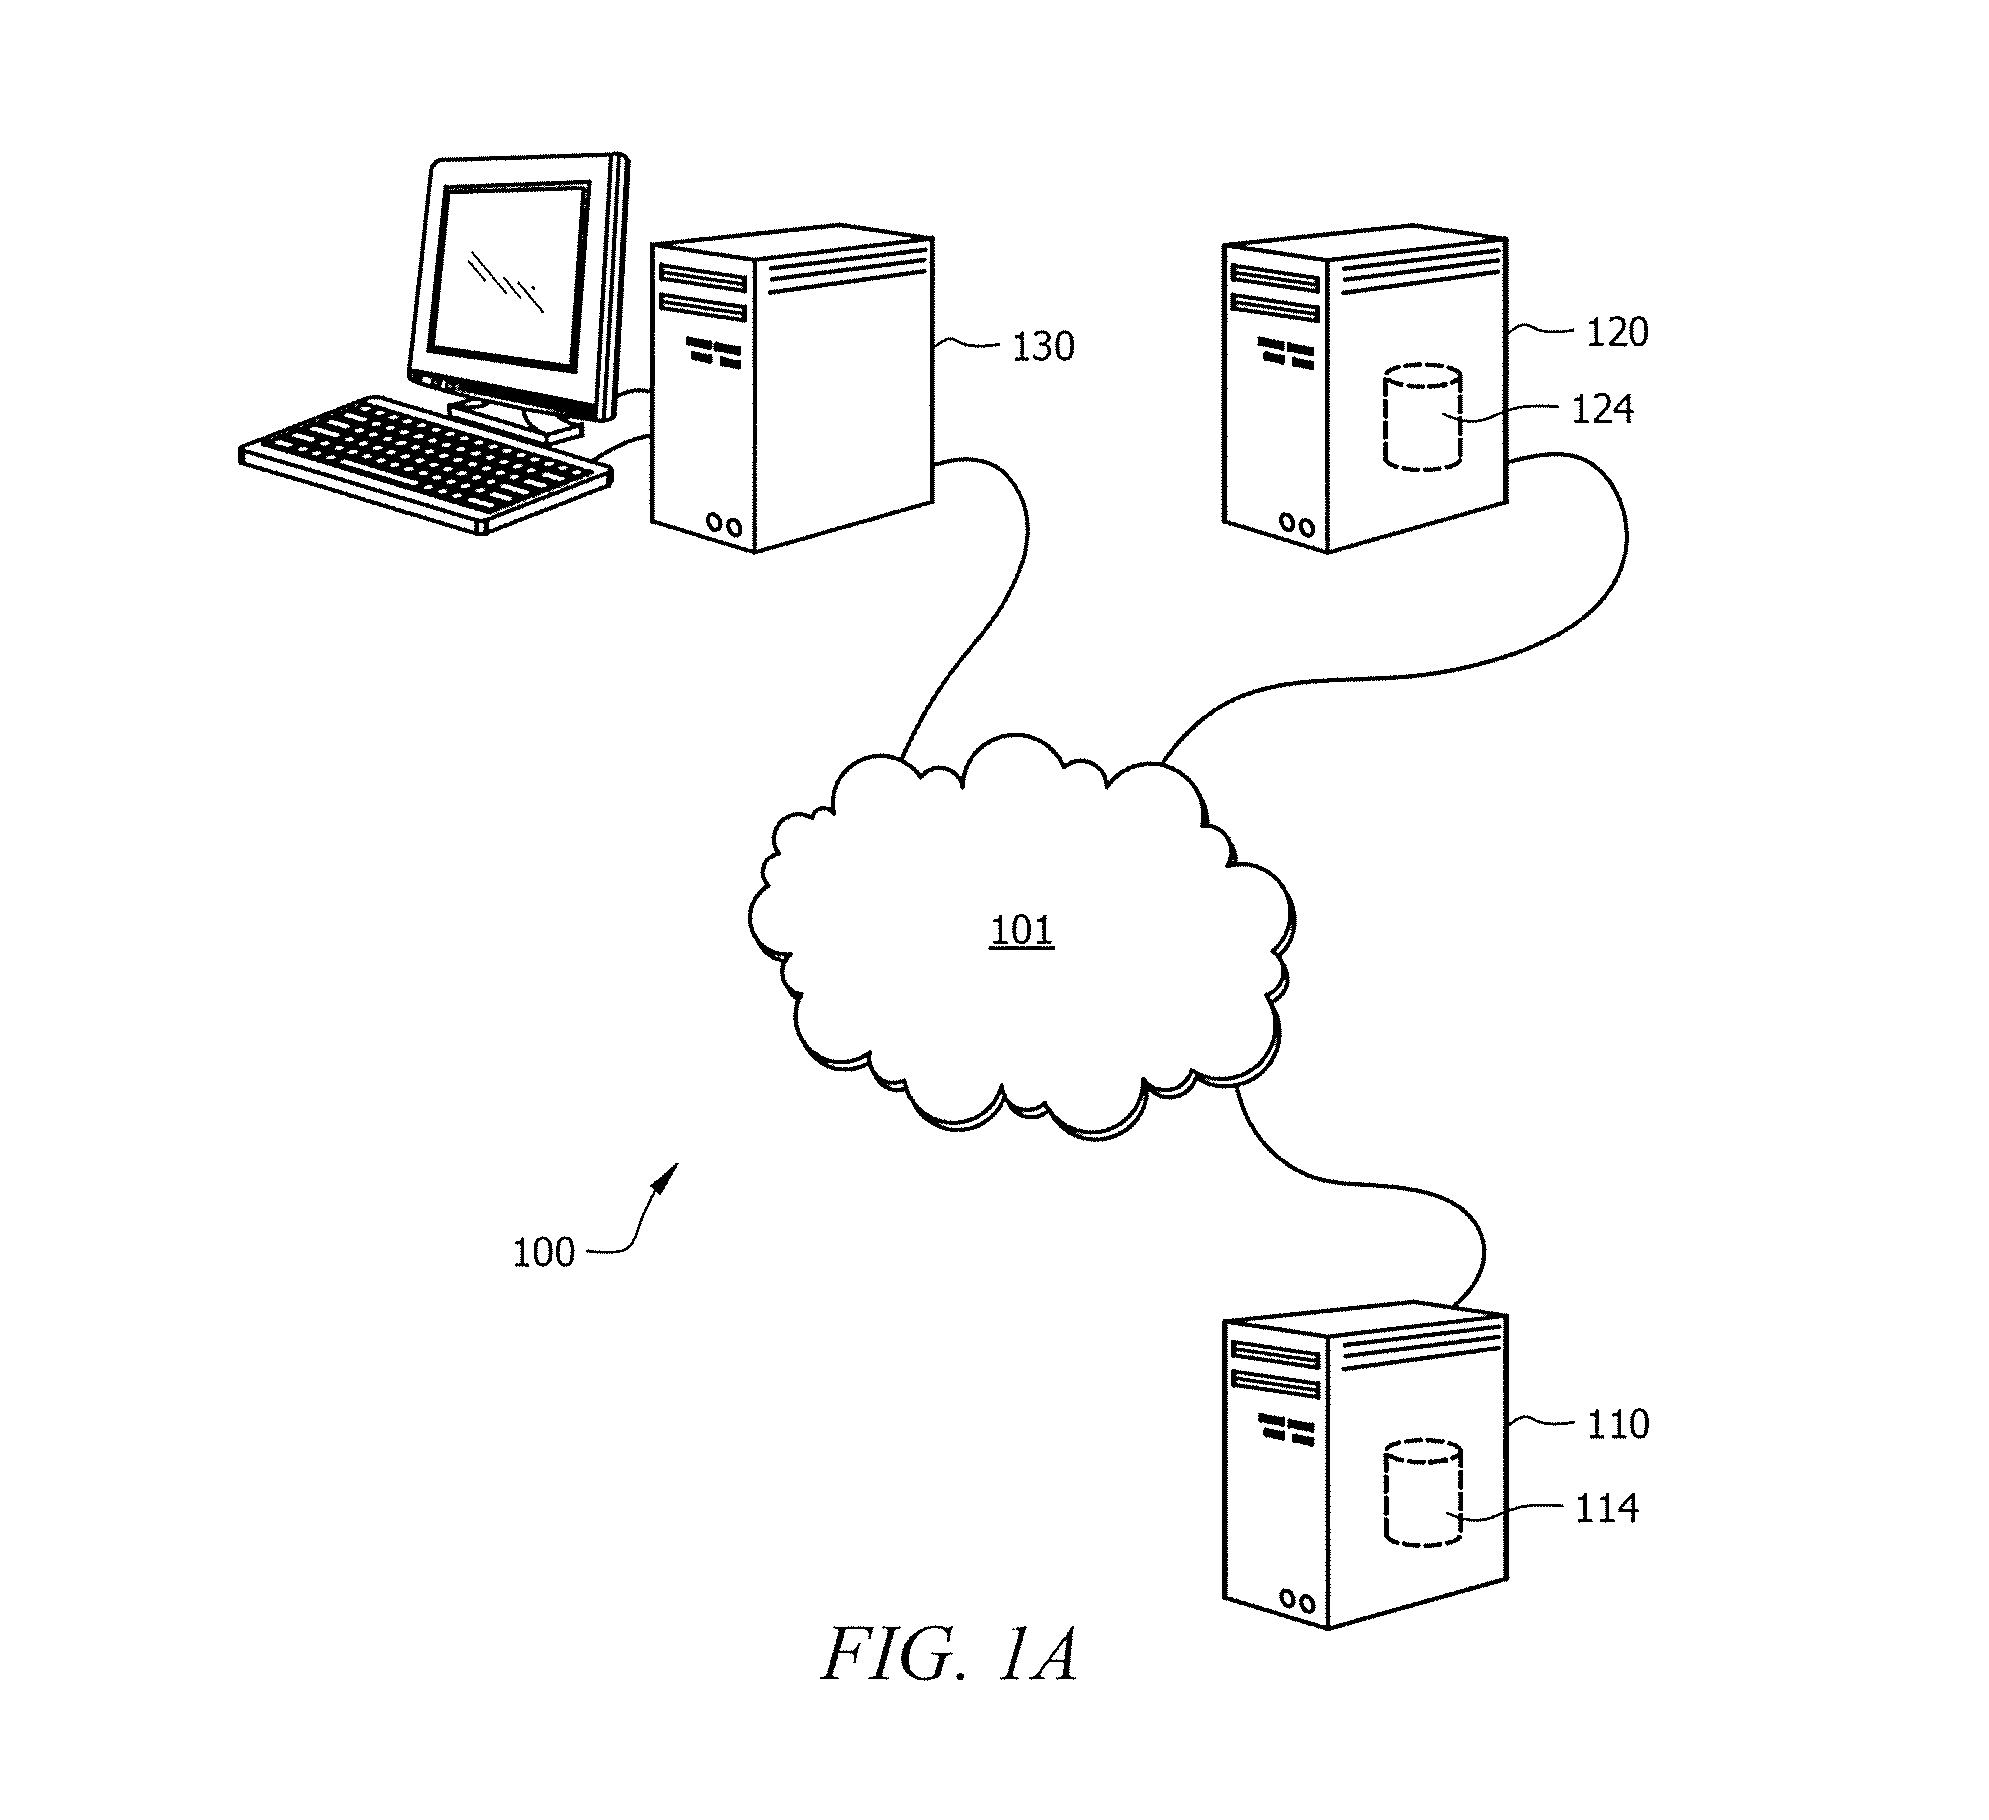 Systems and methods for providing secure multicast intra-cluster communication